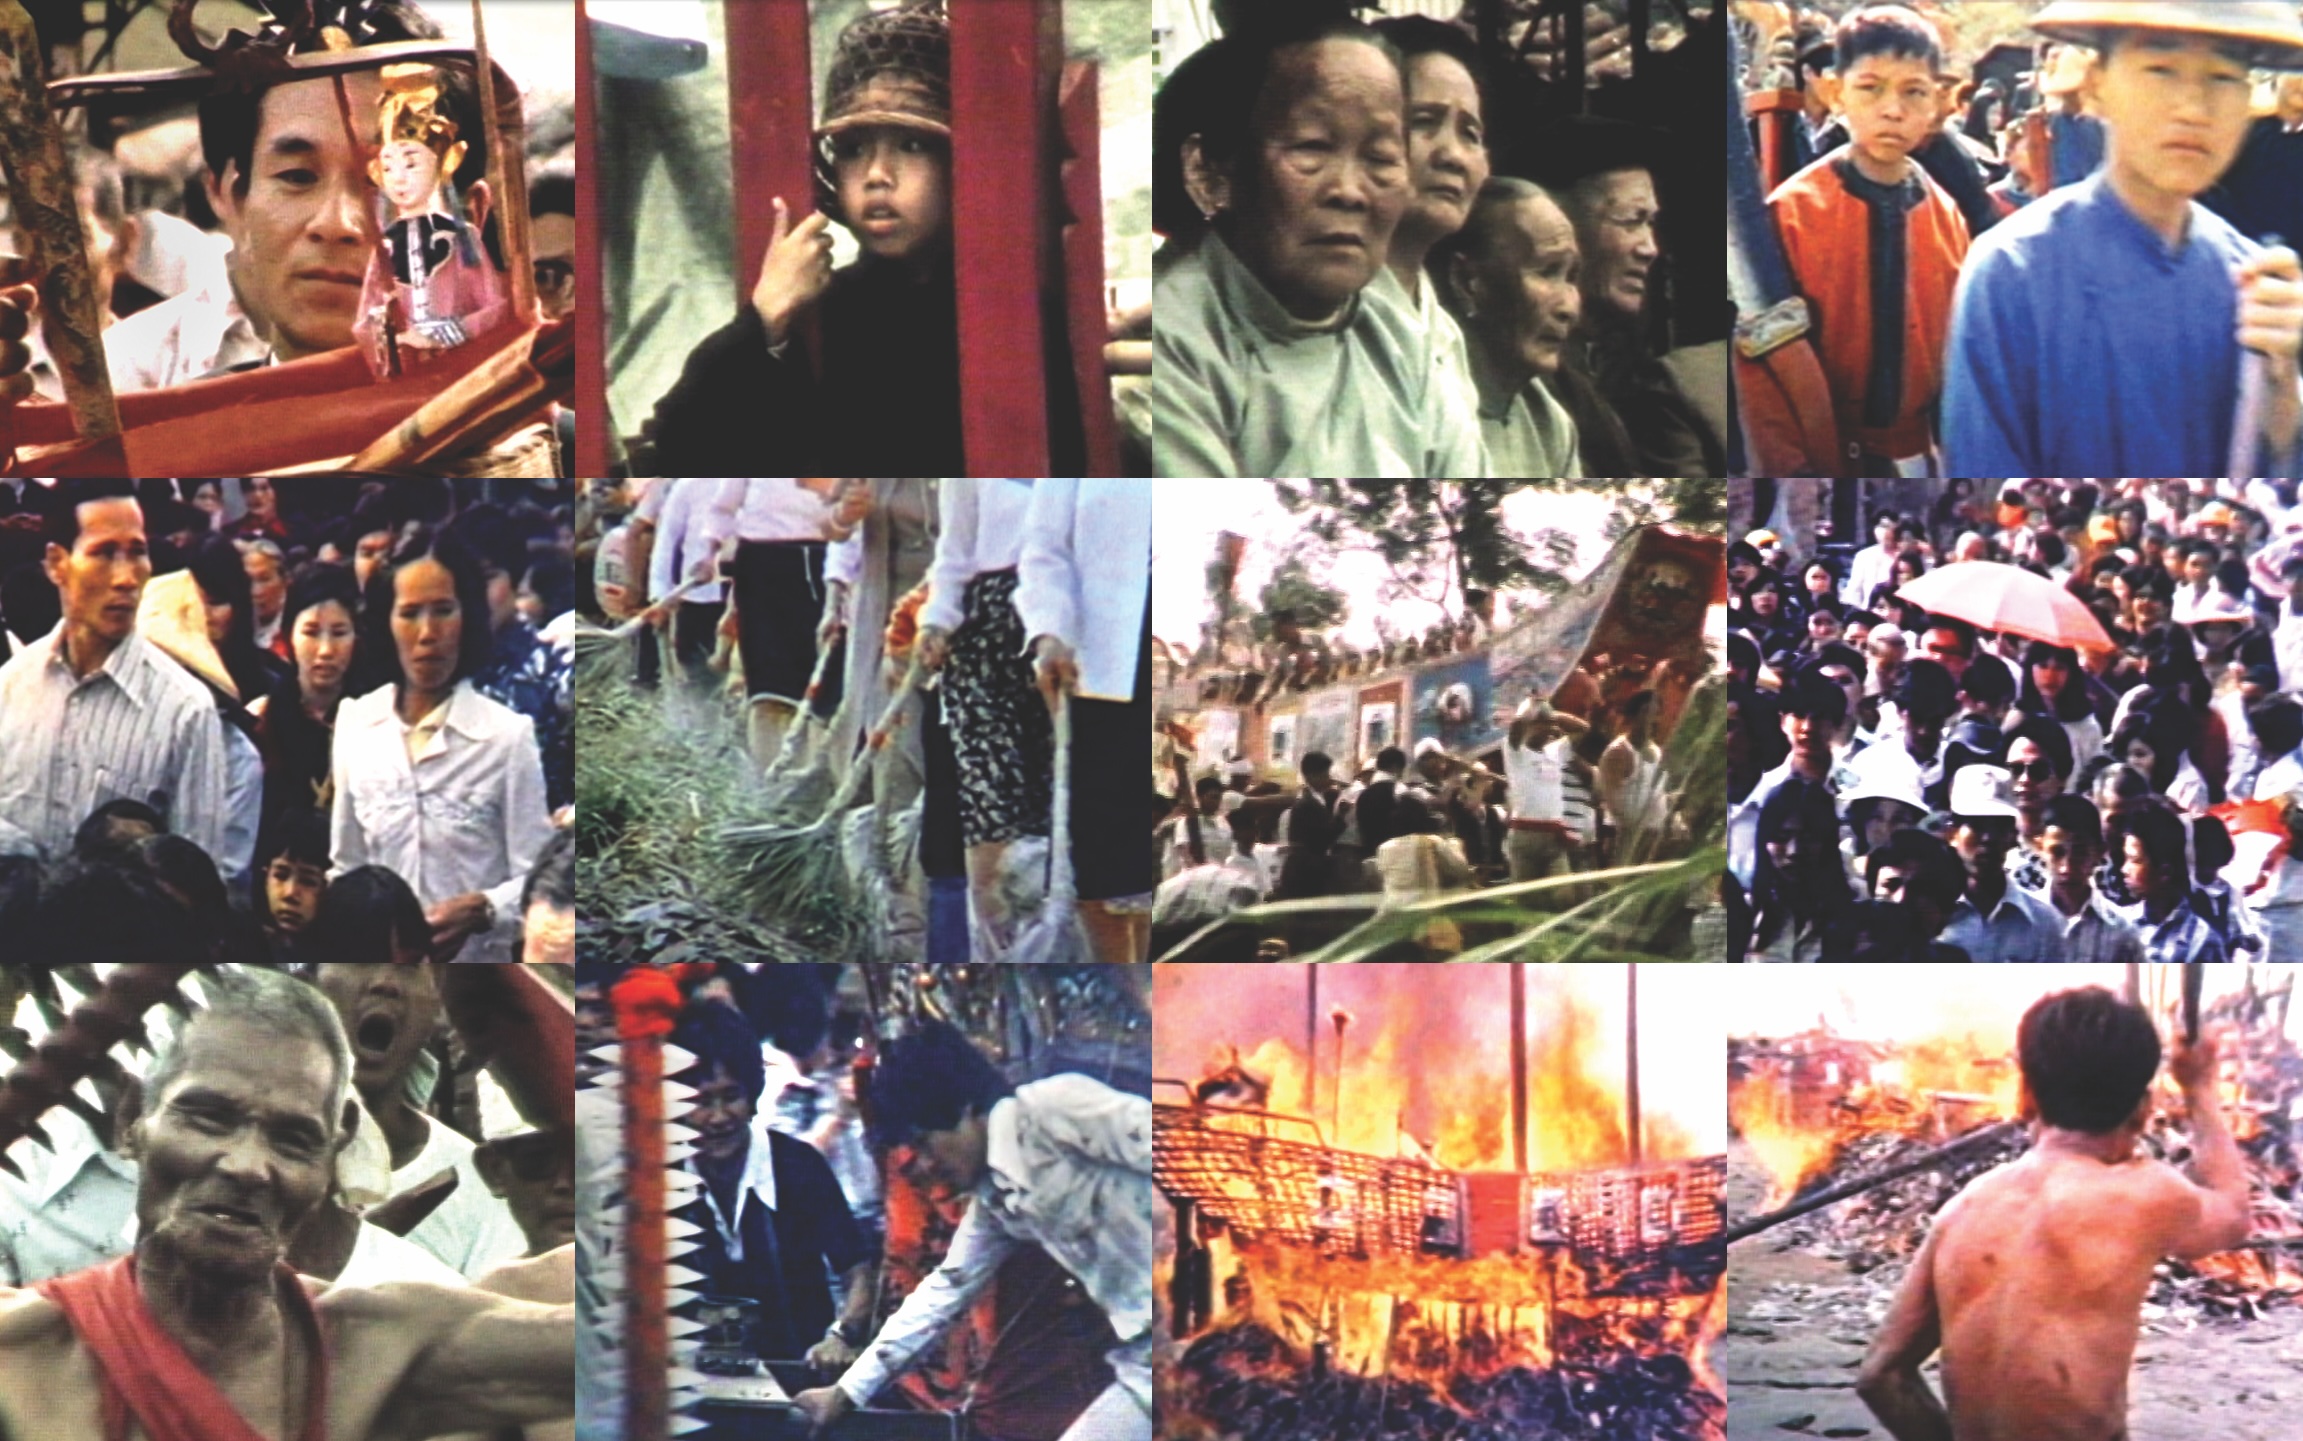 Various stills from “The Boat Burning Festival” highlighting the reactions of attendees to the chaos of the event.